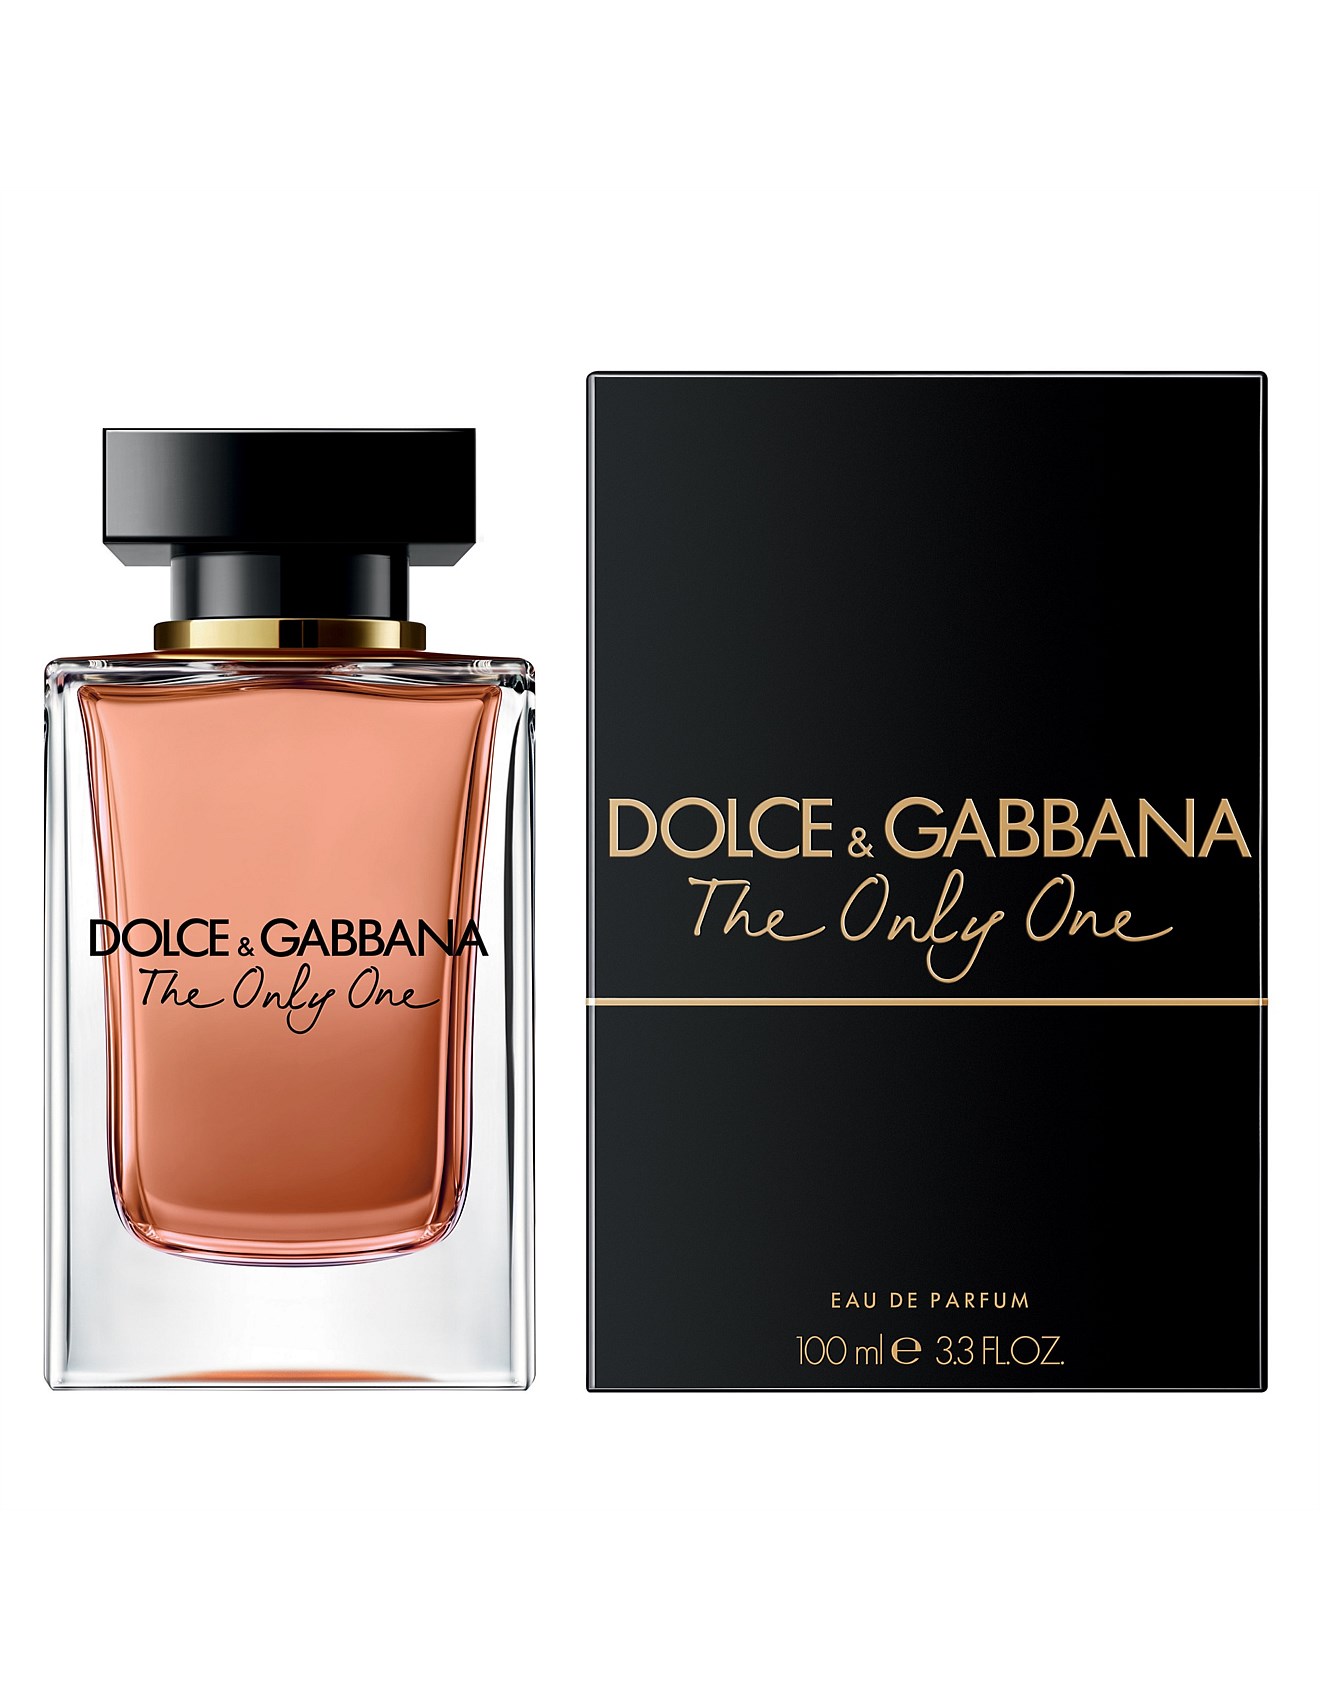 assets/images/dolce-and-gabbana/dolce-amp-gabbana-the-only-one-edp-100ml-for-women.jpg